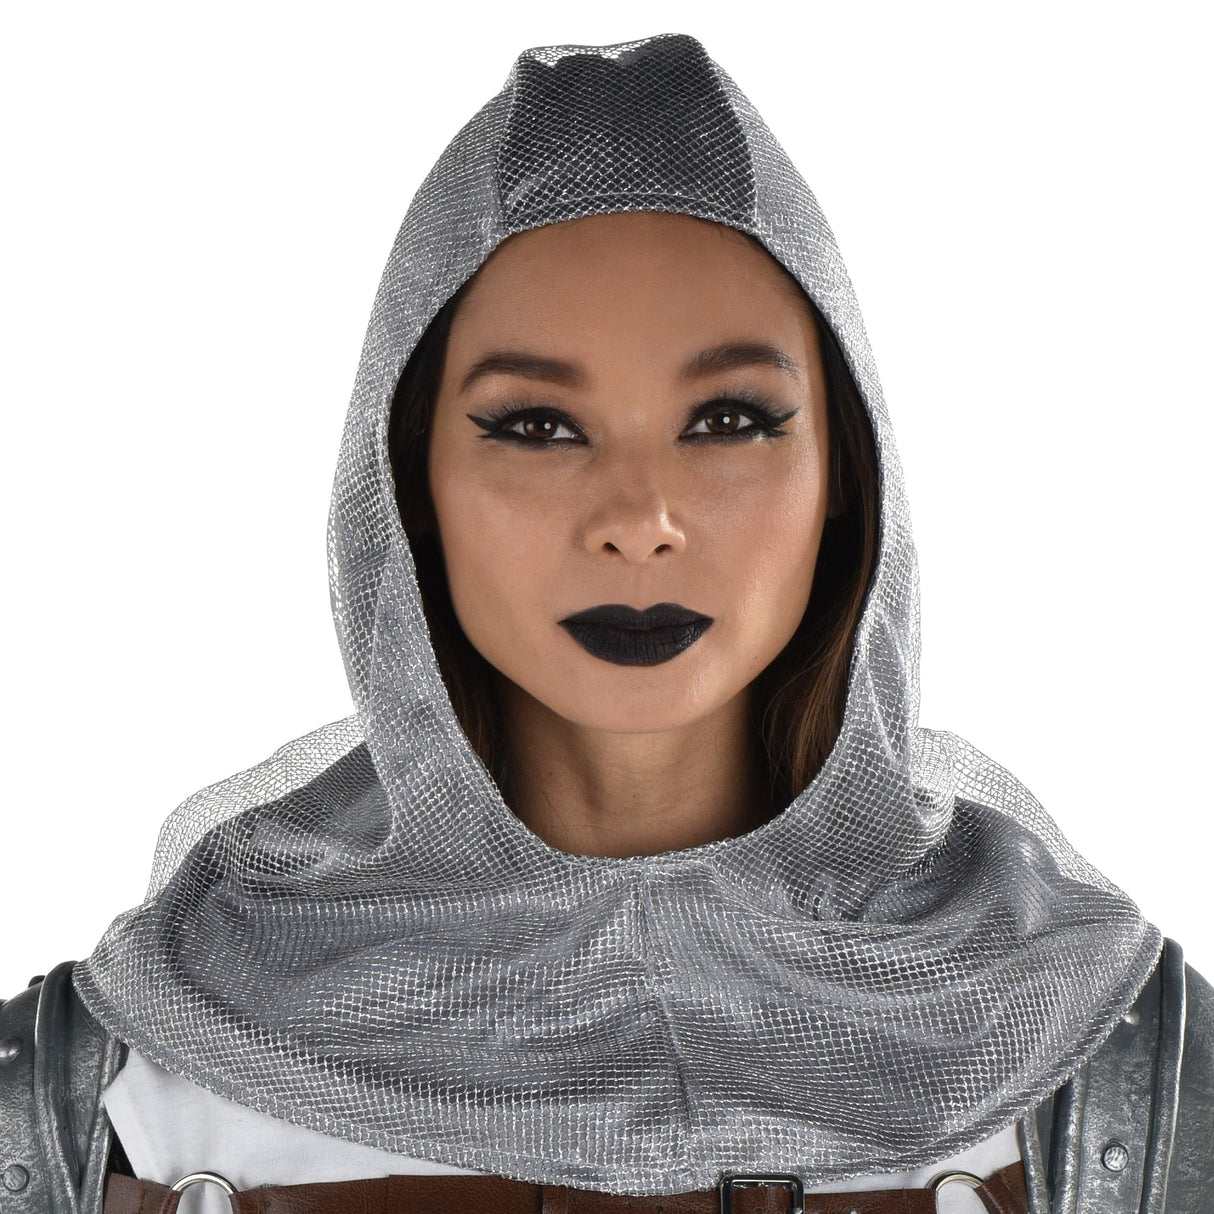 SUIT YOURSELF COSTUME CO. Costume Accessories Chainmail Hood 192937336755